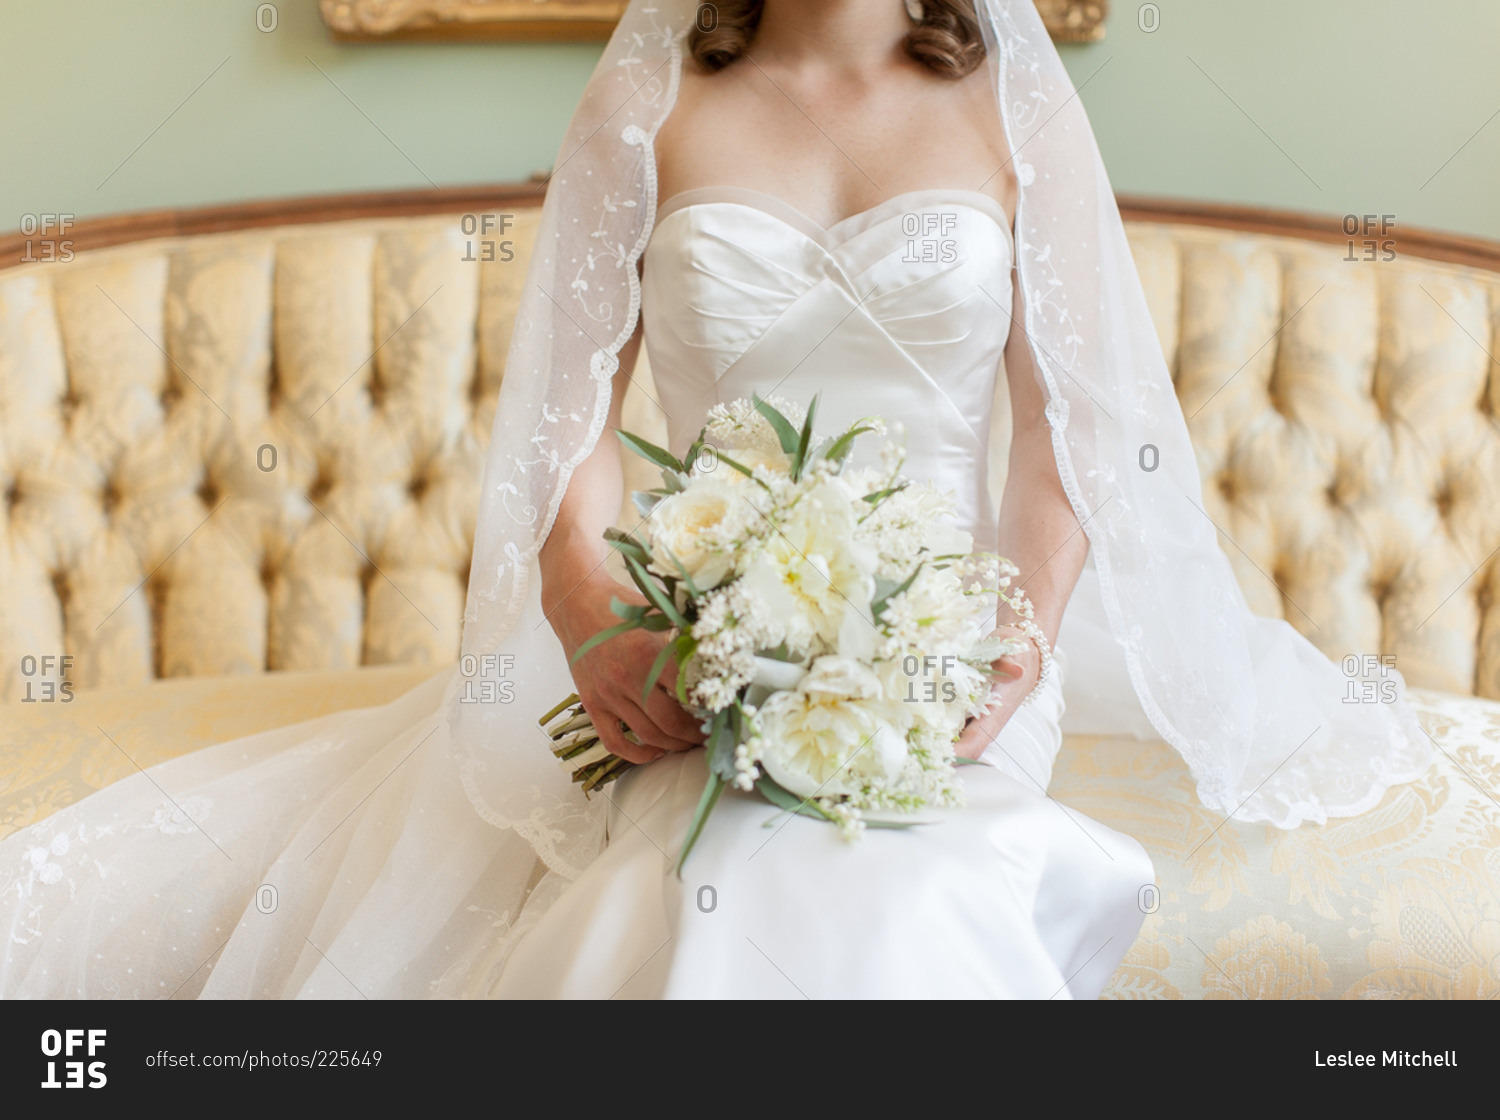 Bride wearing a lace veil and white gown seated on an elegant sofa